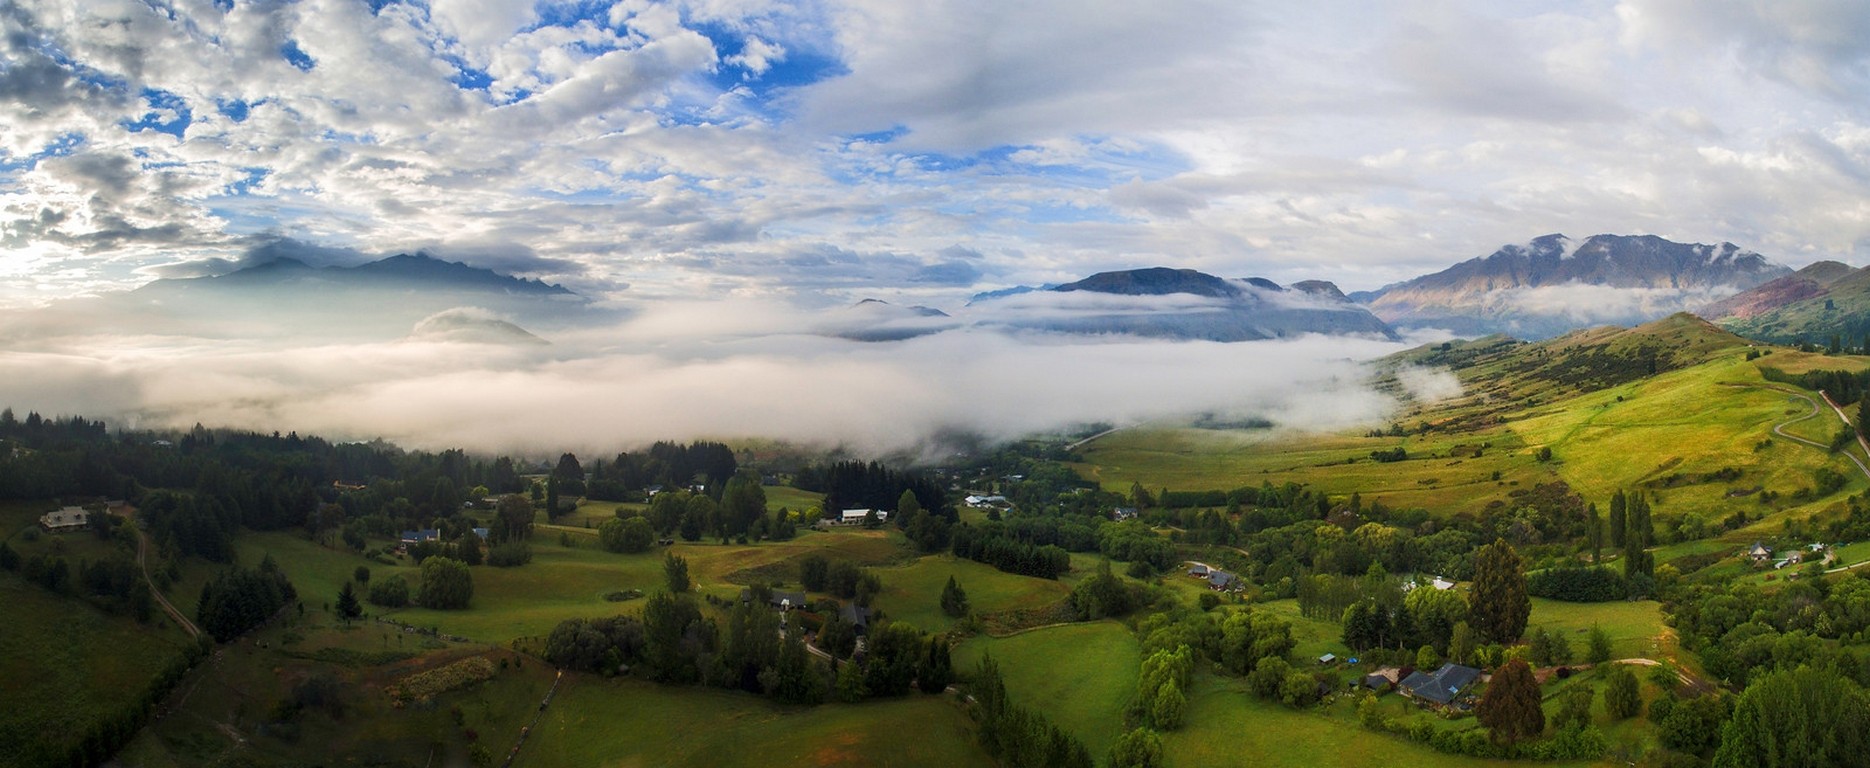 General 1870x768 landscape nature panorama village mountains field mist morning clouds New Zealand trees